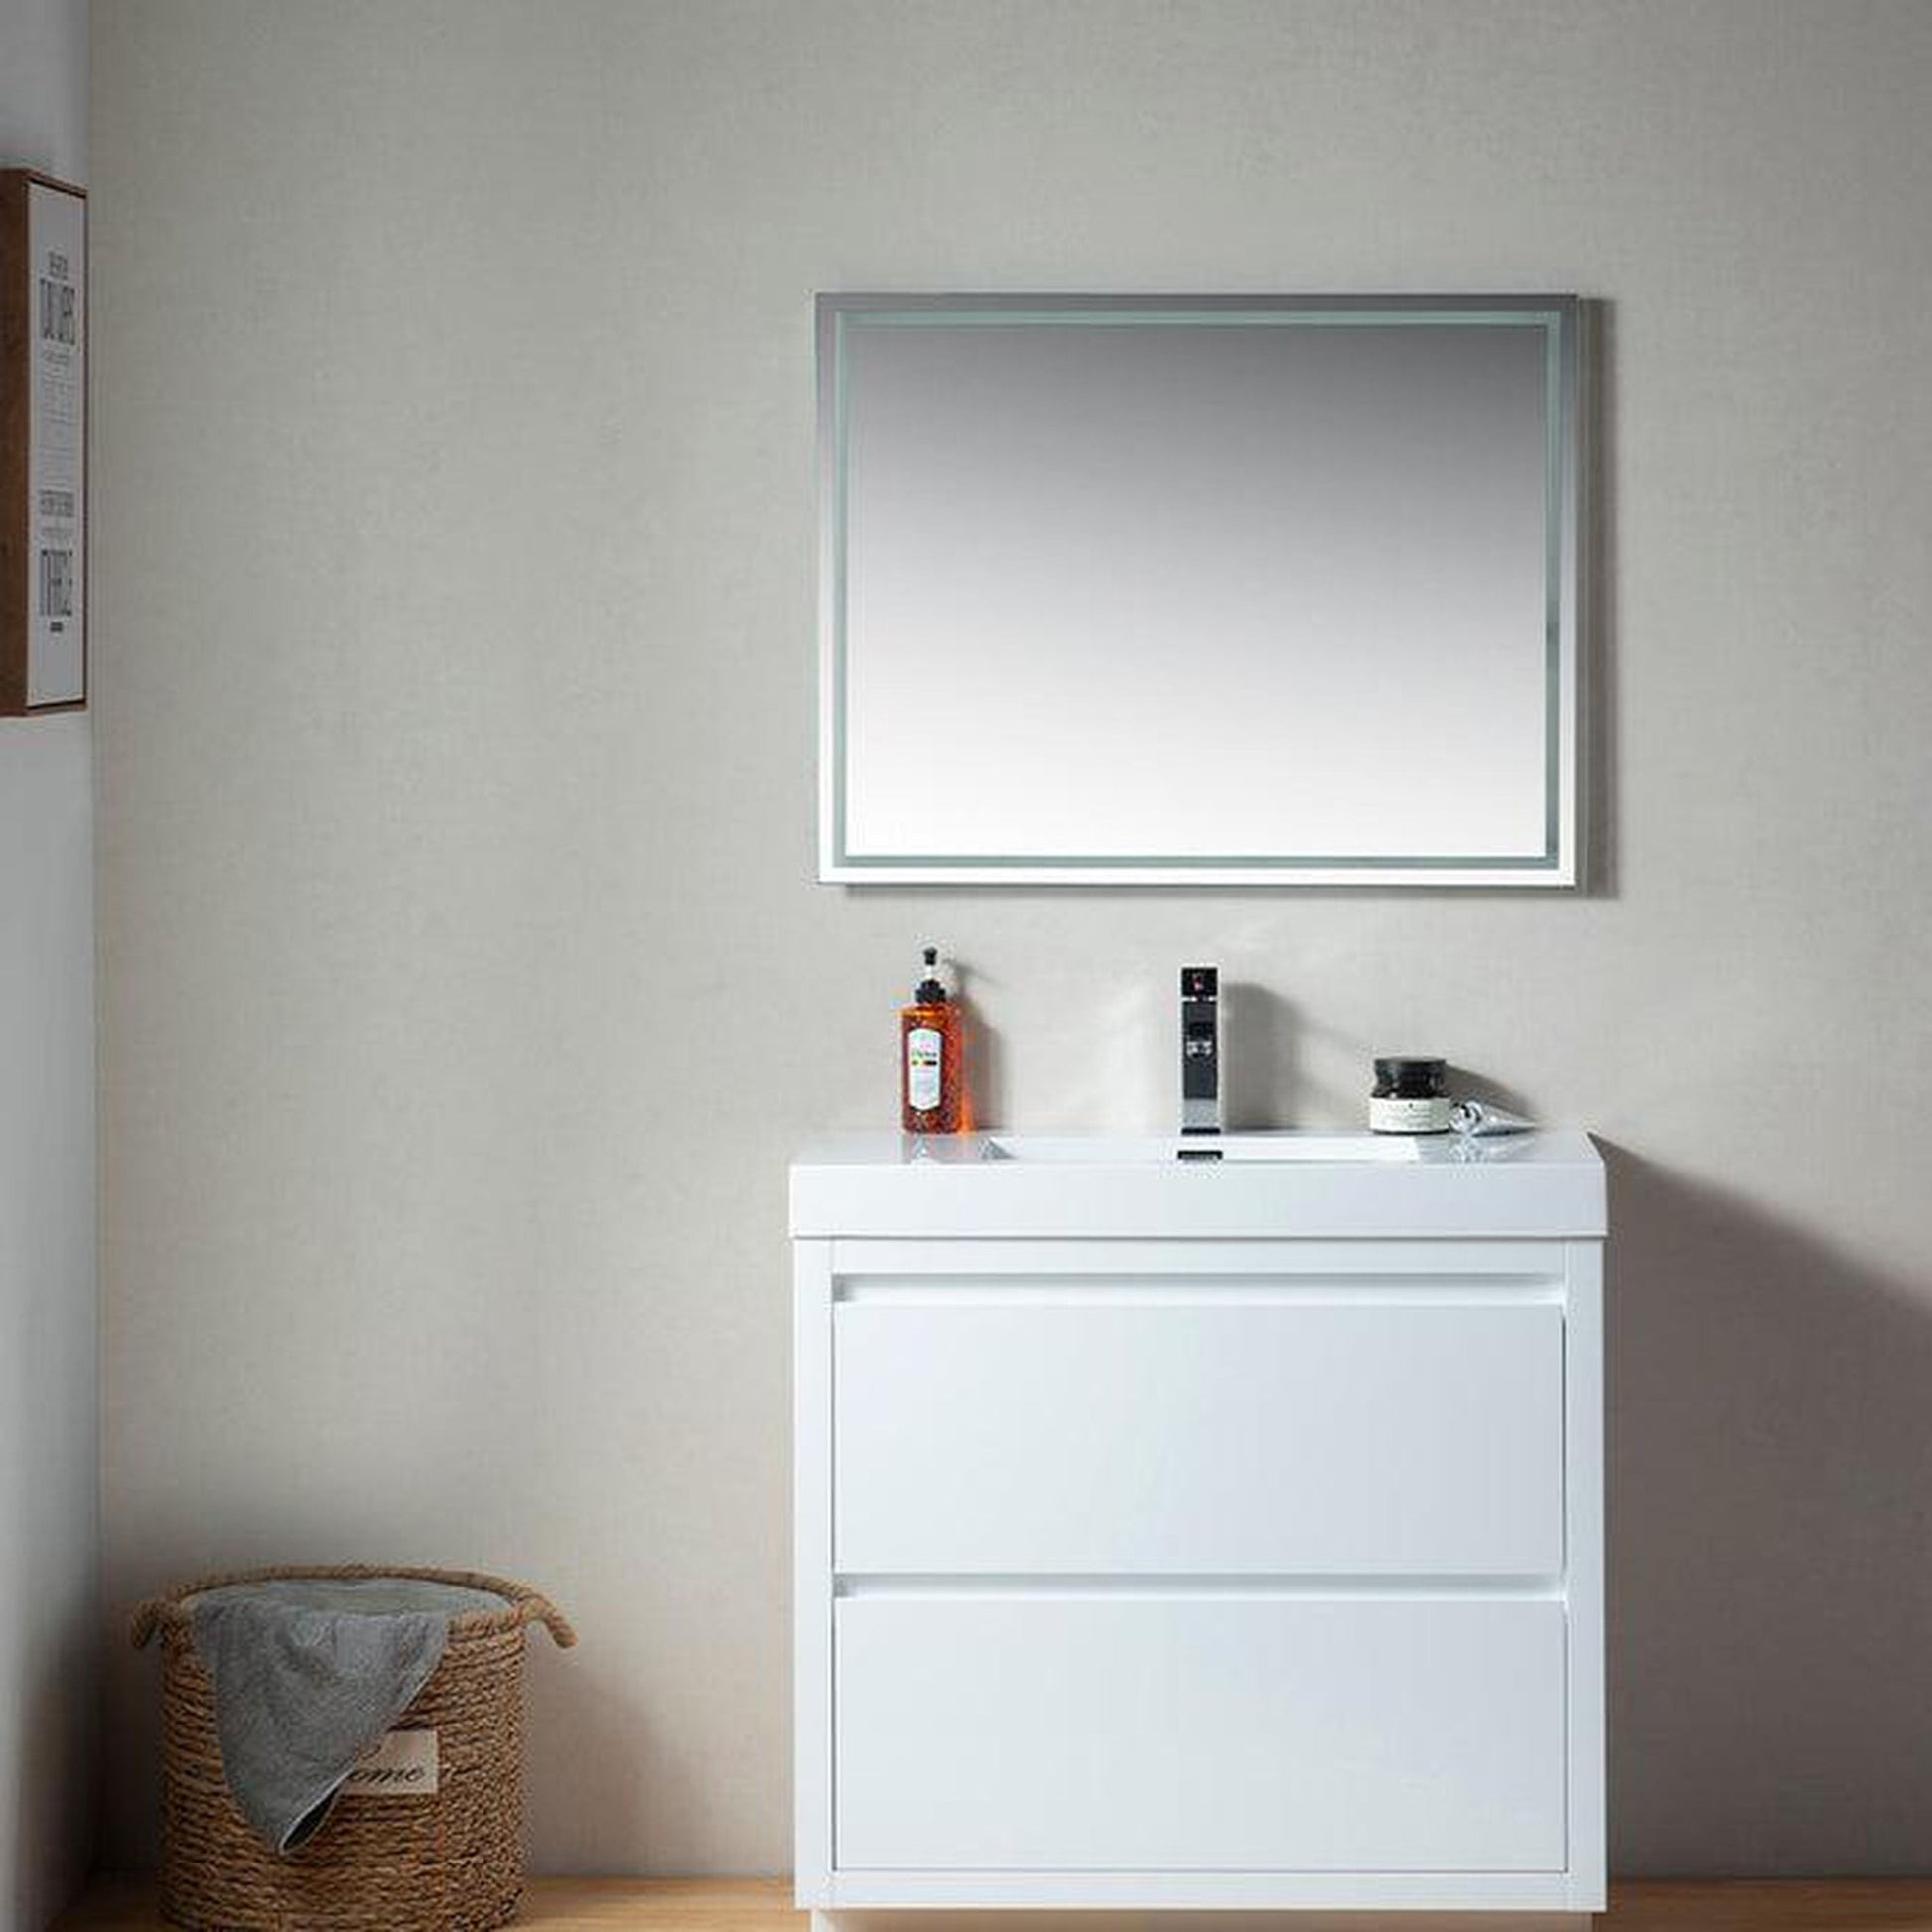 Vanity Art Annecy 36" Glossy White Floor Standing Wall Mounted Vanity Set With White Engineered Stone Top, Integrated Single Sink, and Mirror